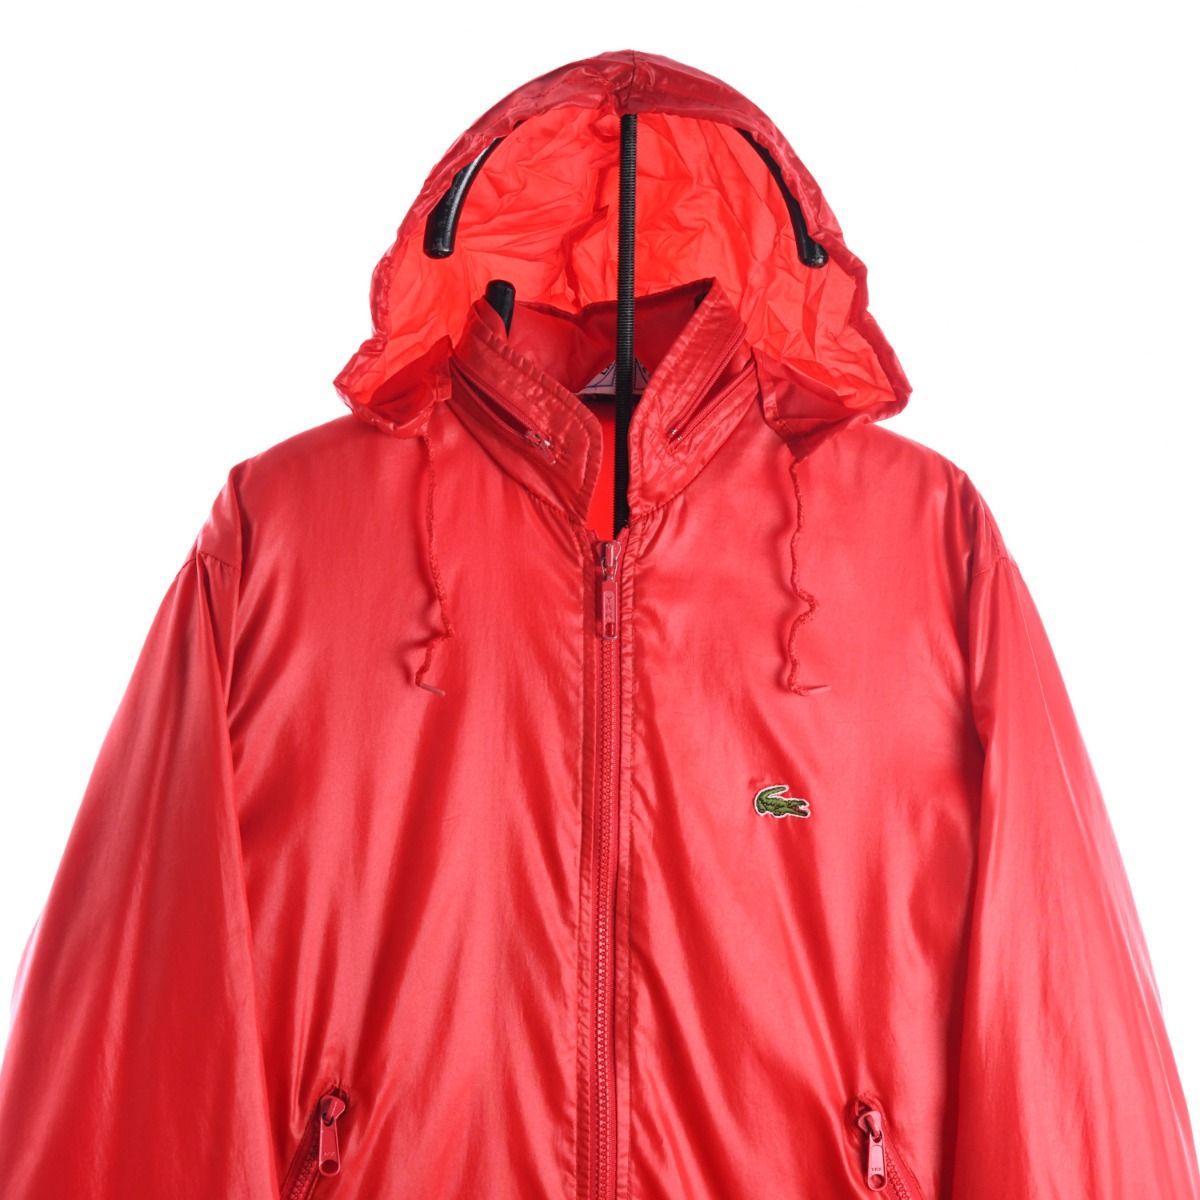 Lacoste IZOD 1980s Red Shell Jacket